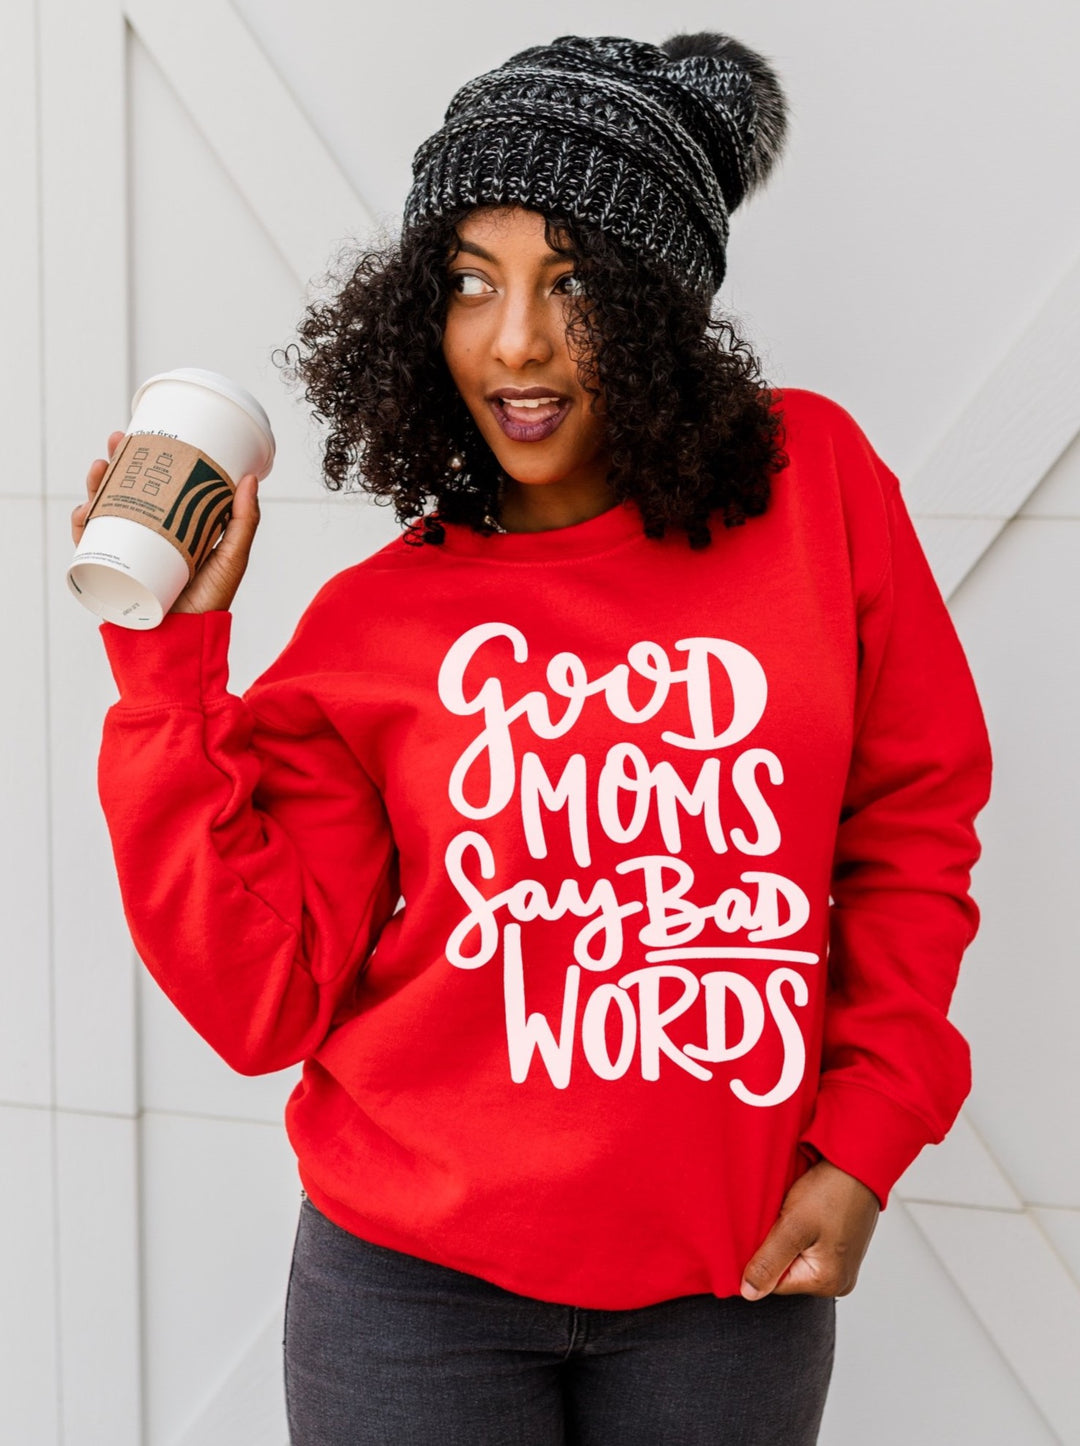 Red sweatshirt with white lettering that says good moms say bad words